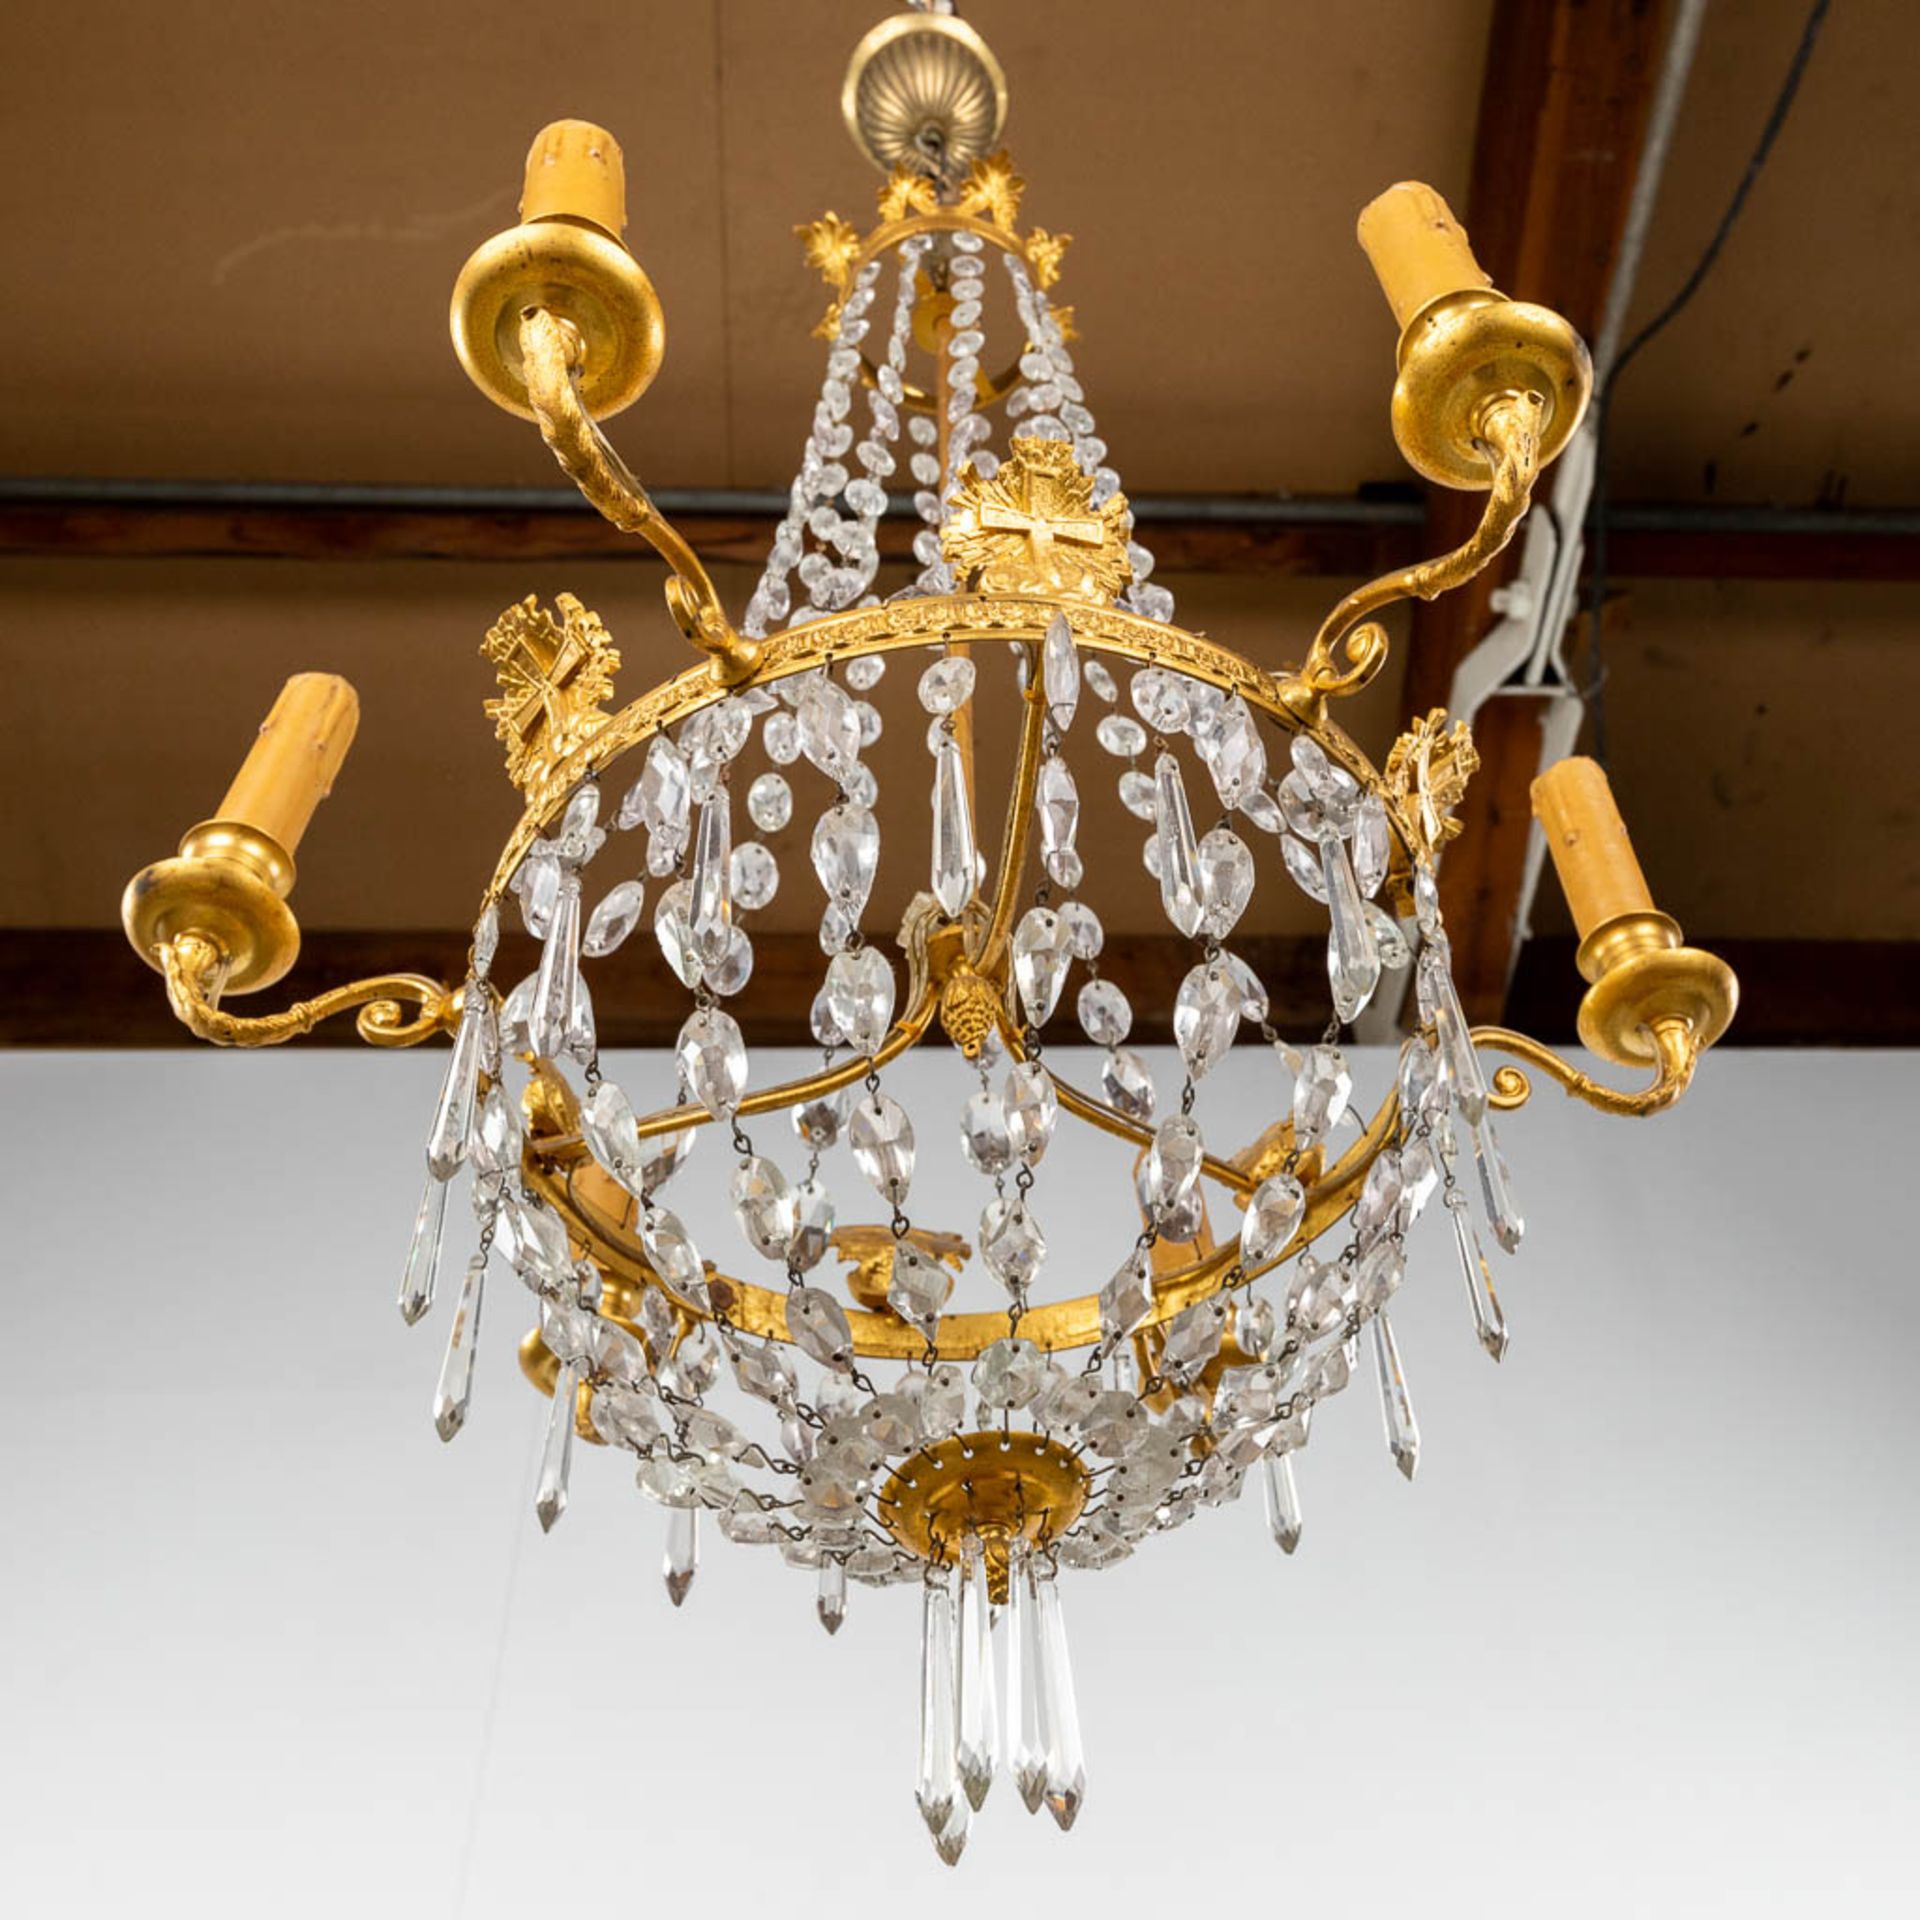 A chandelier 'Sac ˆ Perles', bronze and glass in empire style. 20th C. (H: 100 x D: 50 cm) - Image 11 of 11